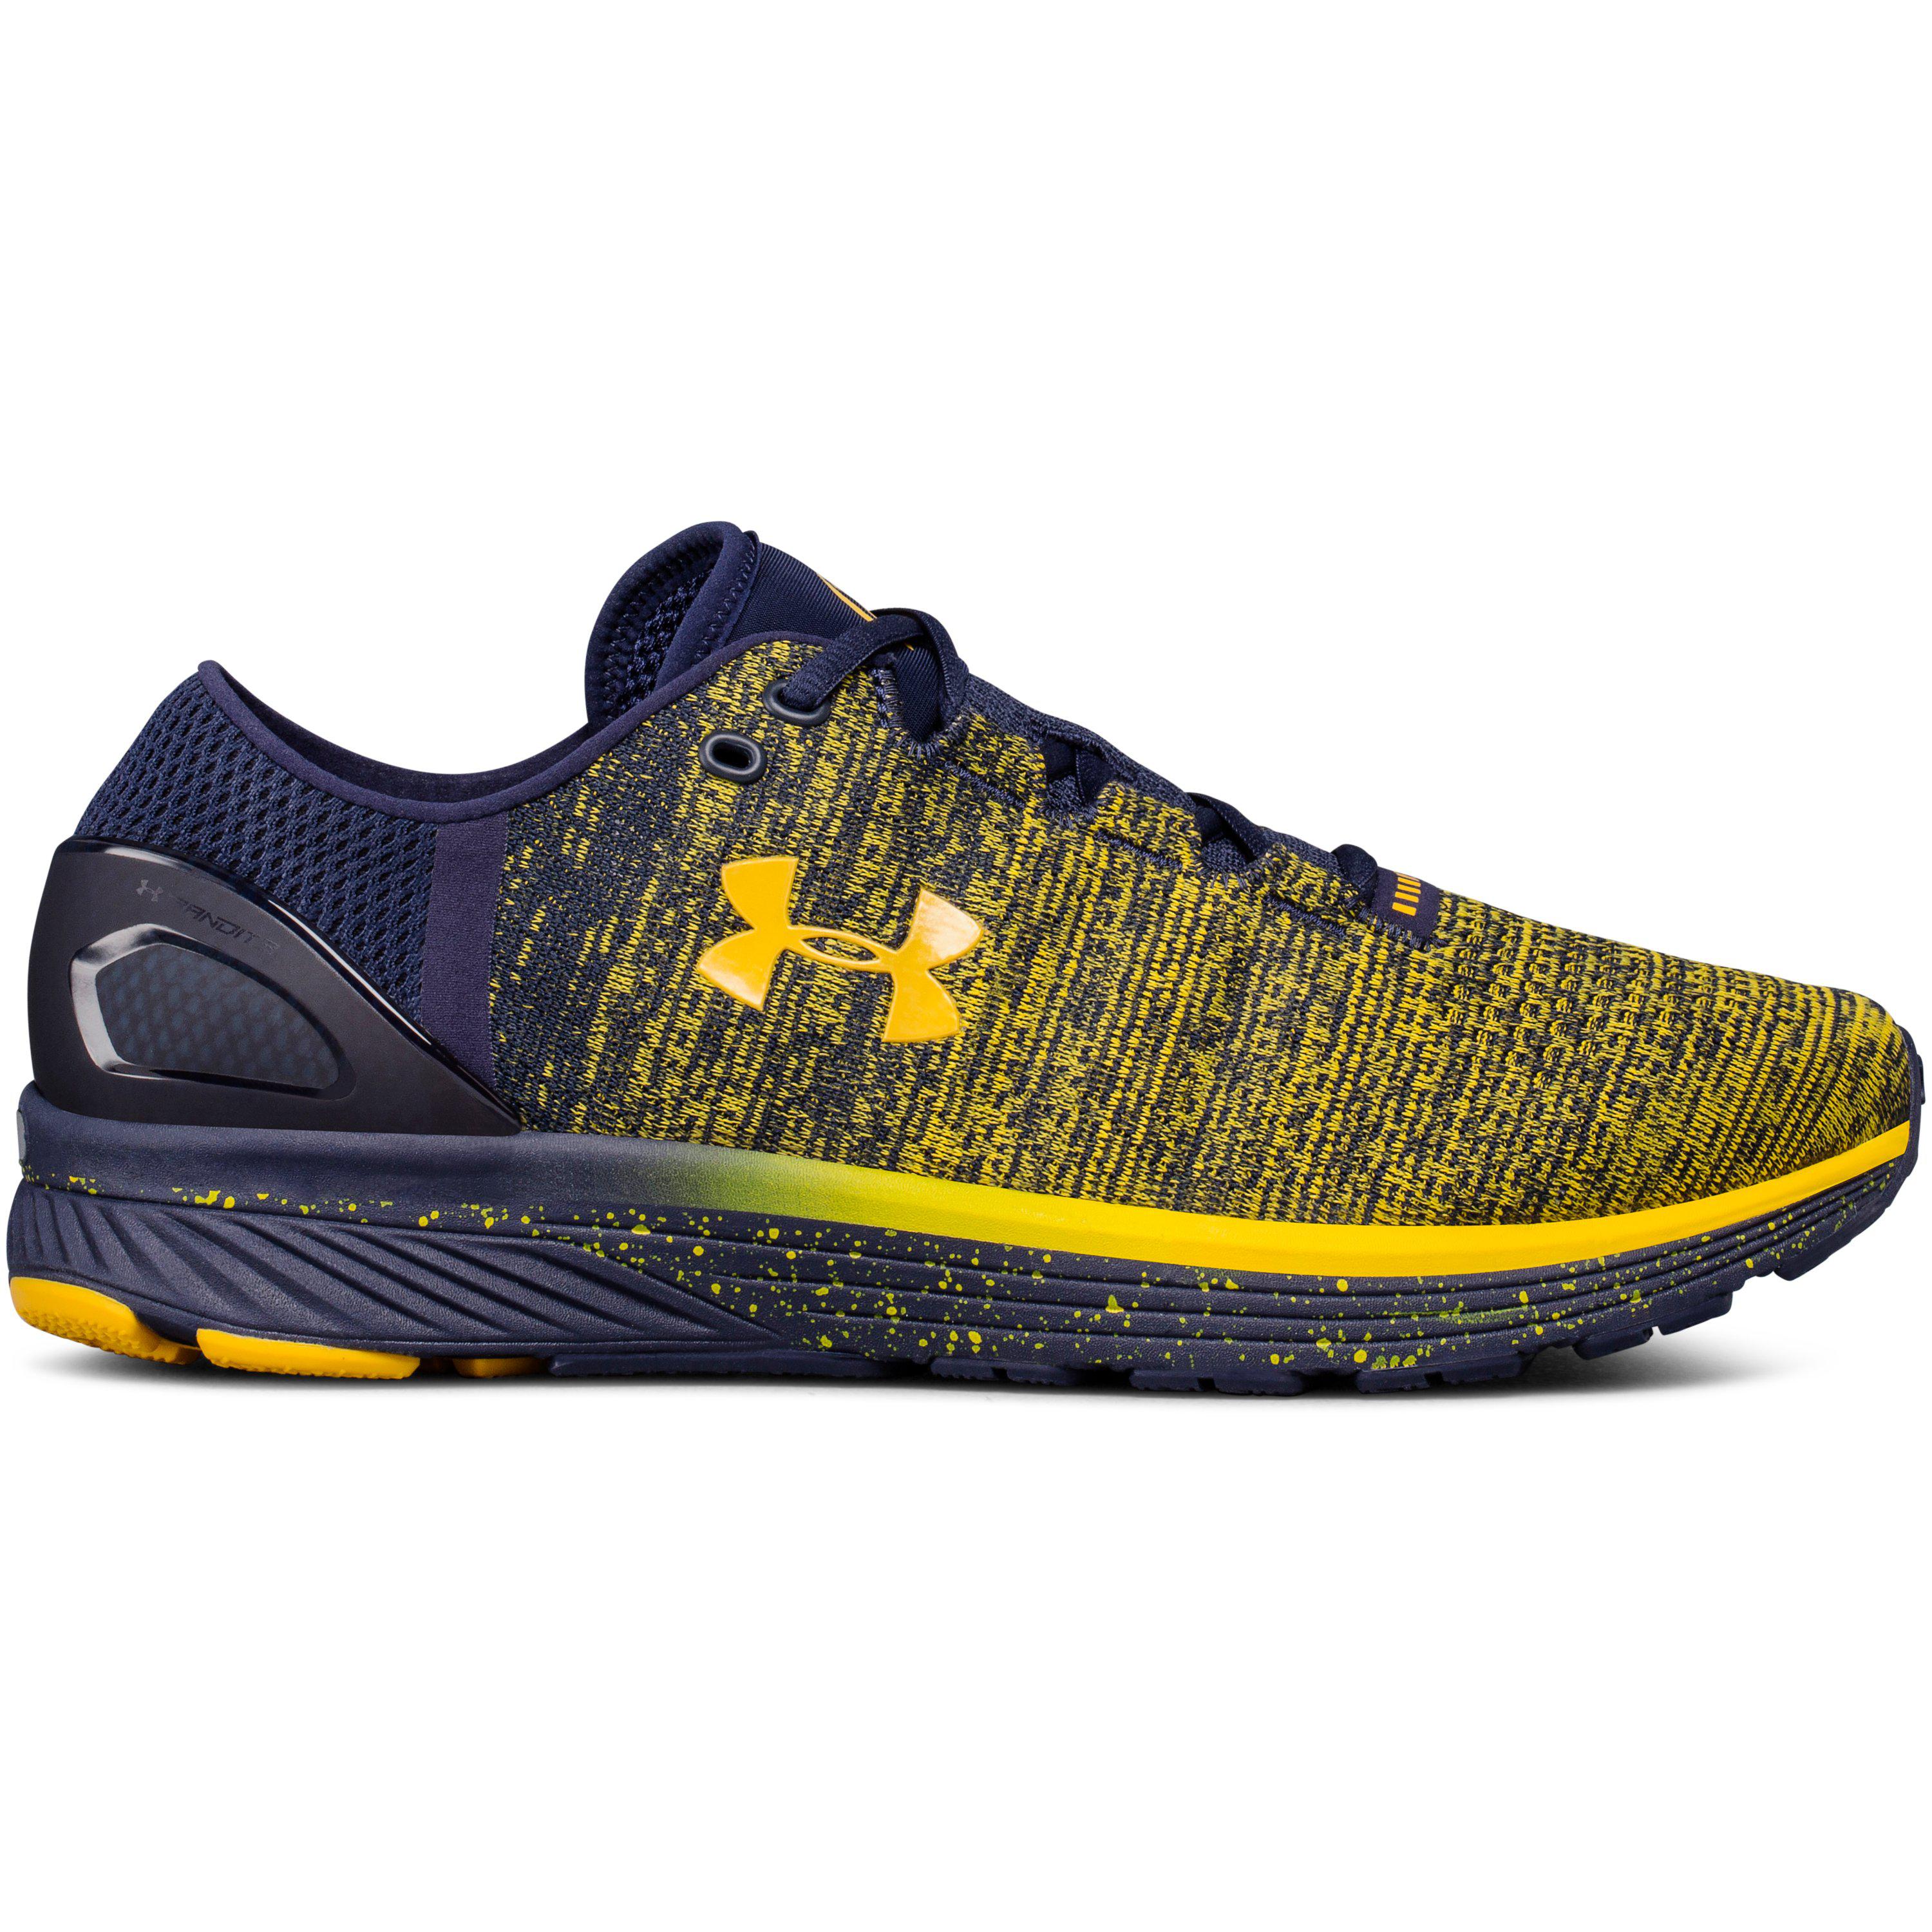 Under Armour Rubber Men's Ua Team Charged Bandit 3 Running Shoes in ...